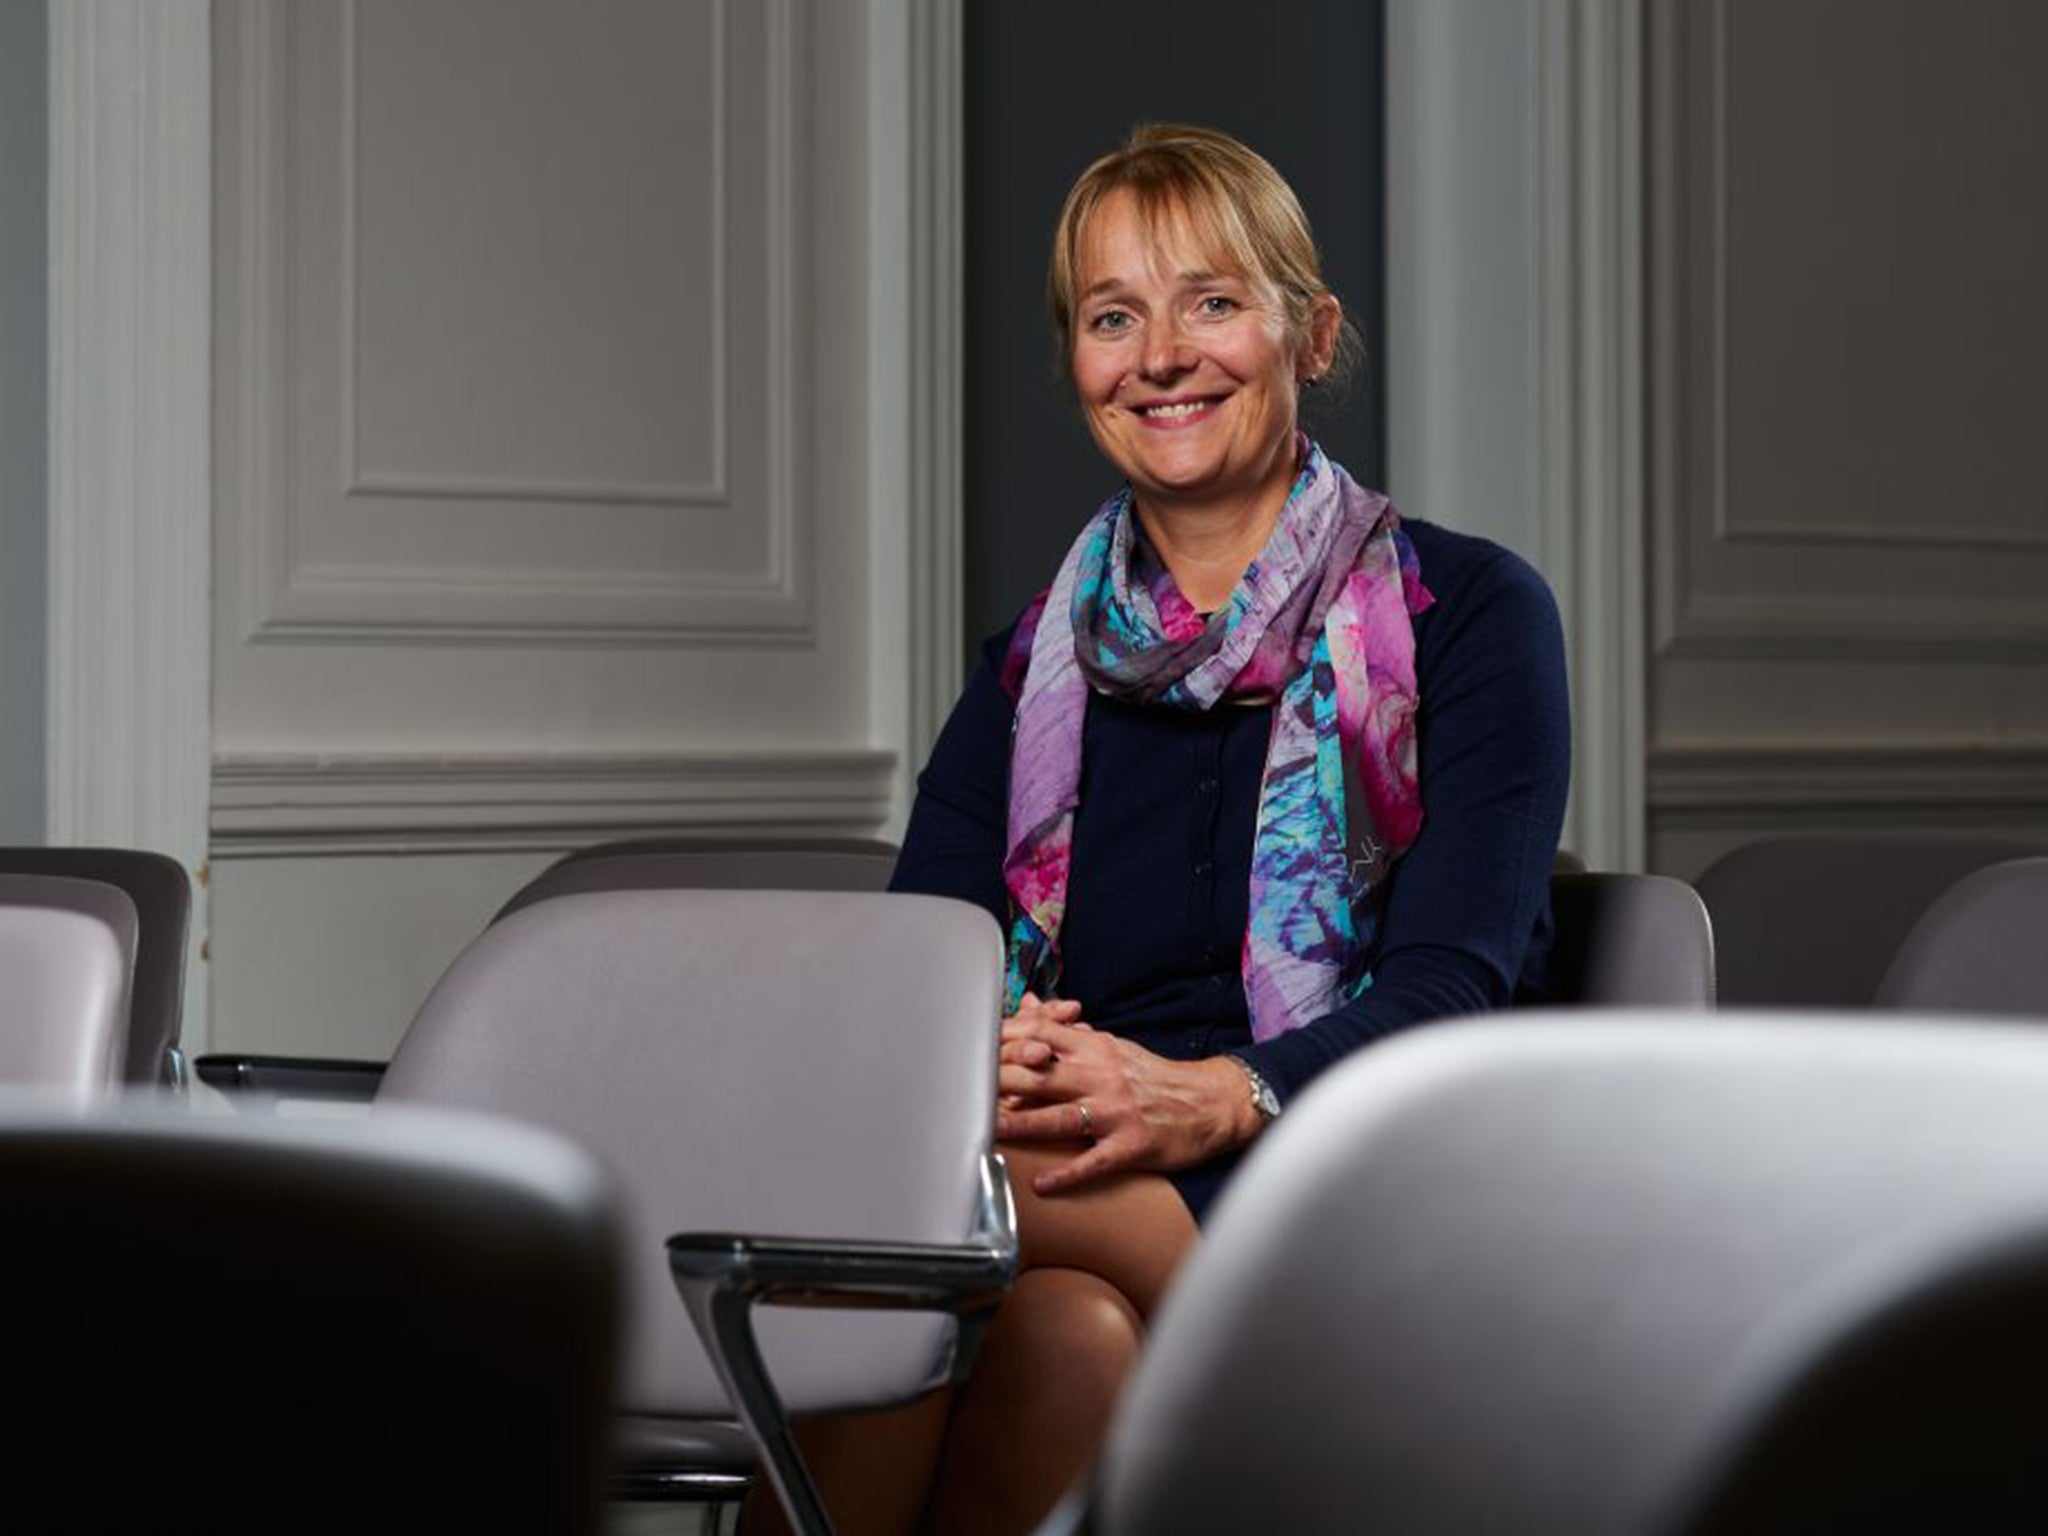 Naomi Climer will become the first female president of the Institution of Engineering and Technology